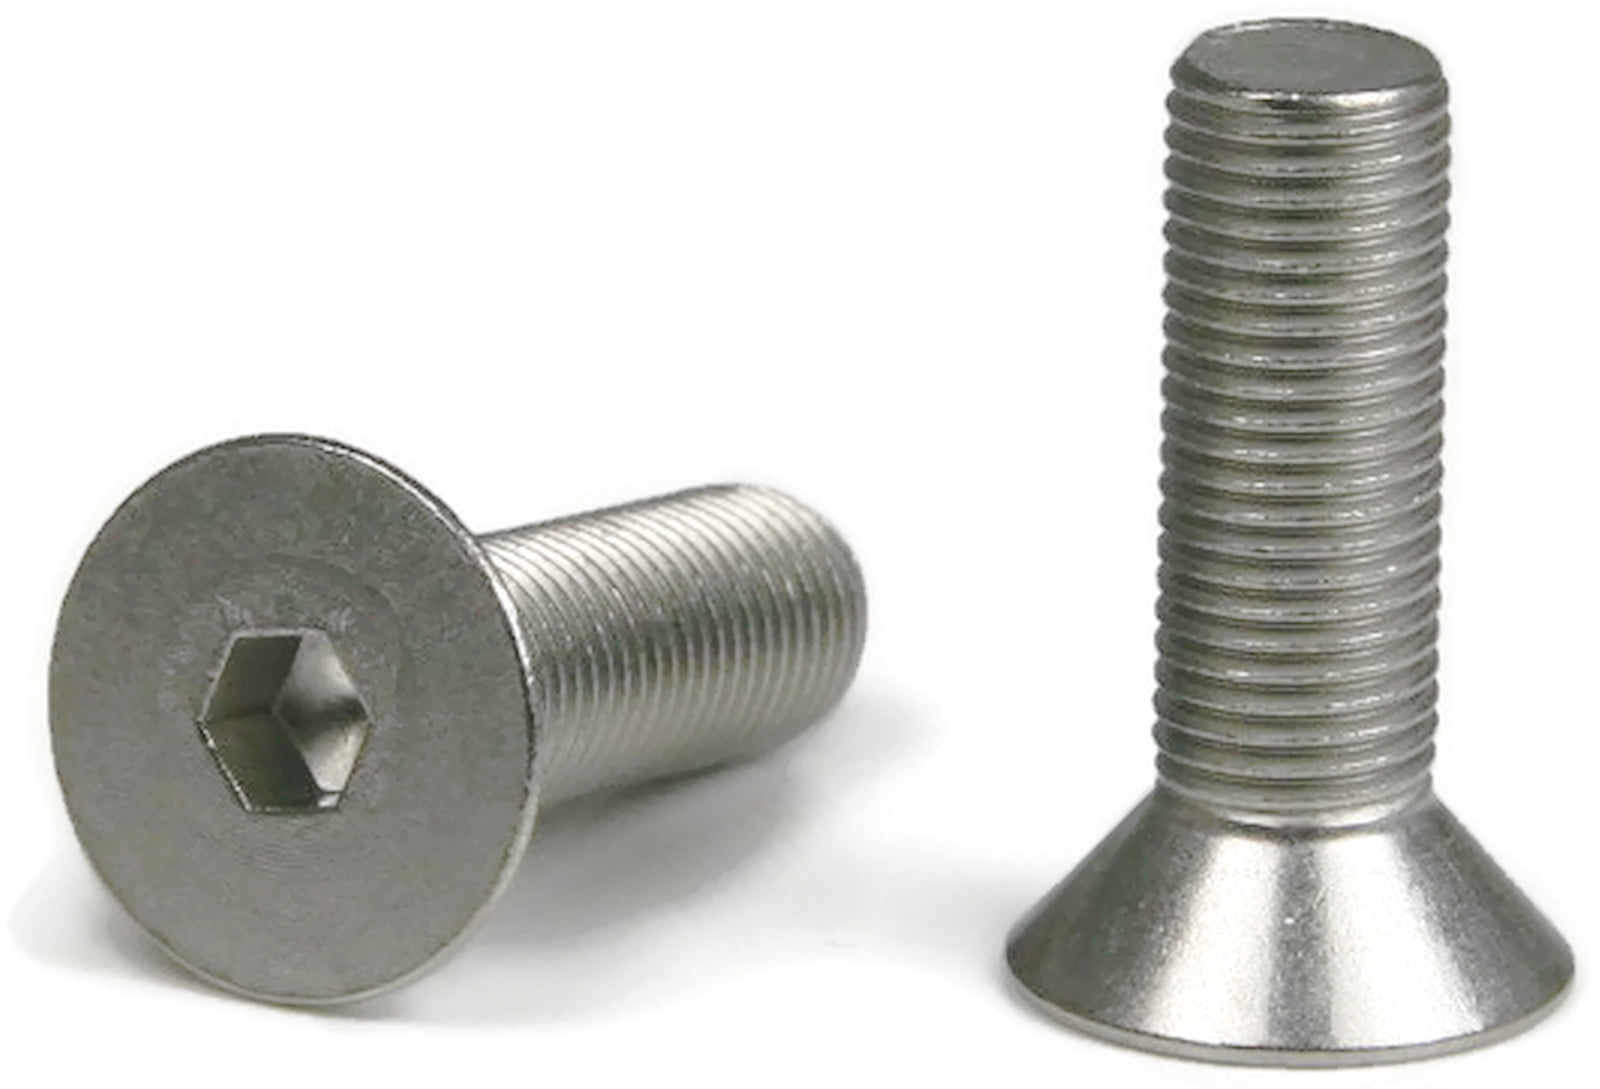 6#-32 8#-32*1/4-2 inch Countersunk Flat Hex Screws UNC 304 Stainless Steel 